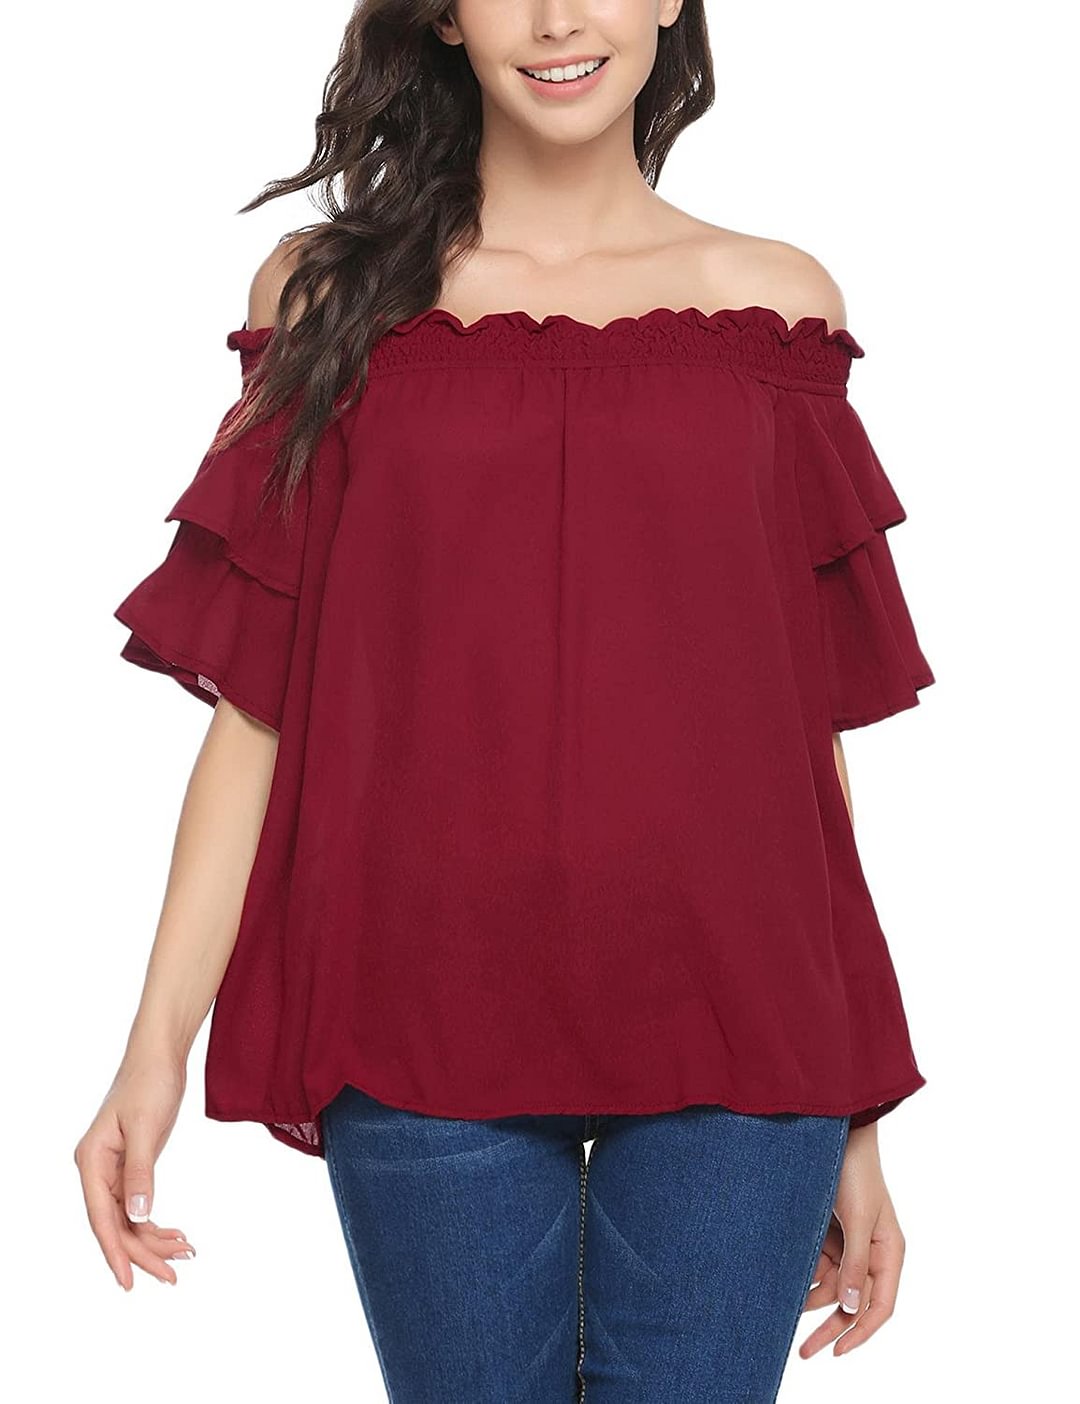 Women's Off Shoulder Bell Sleeve Shirt Casual Loose Chiffon Blouses Sexy Tops